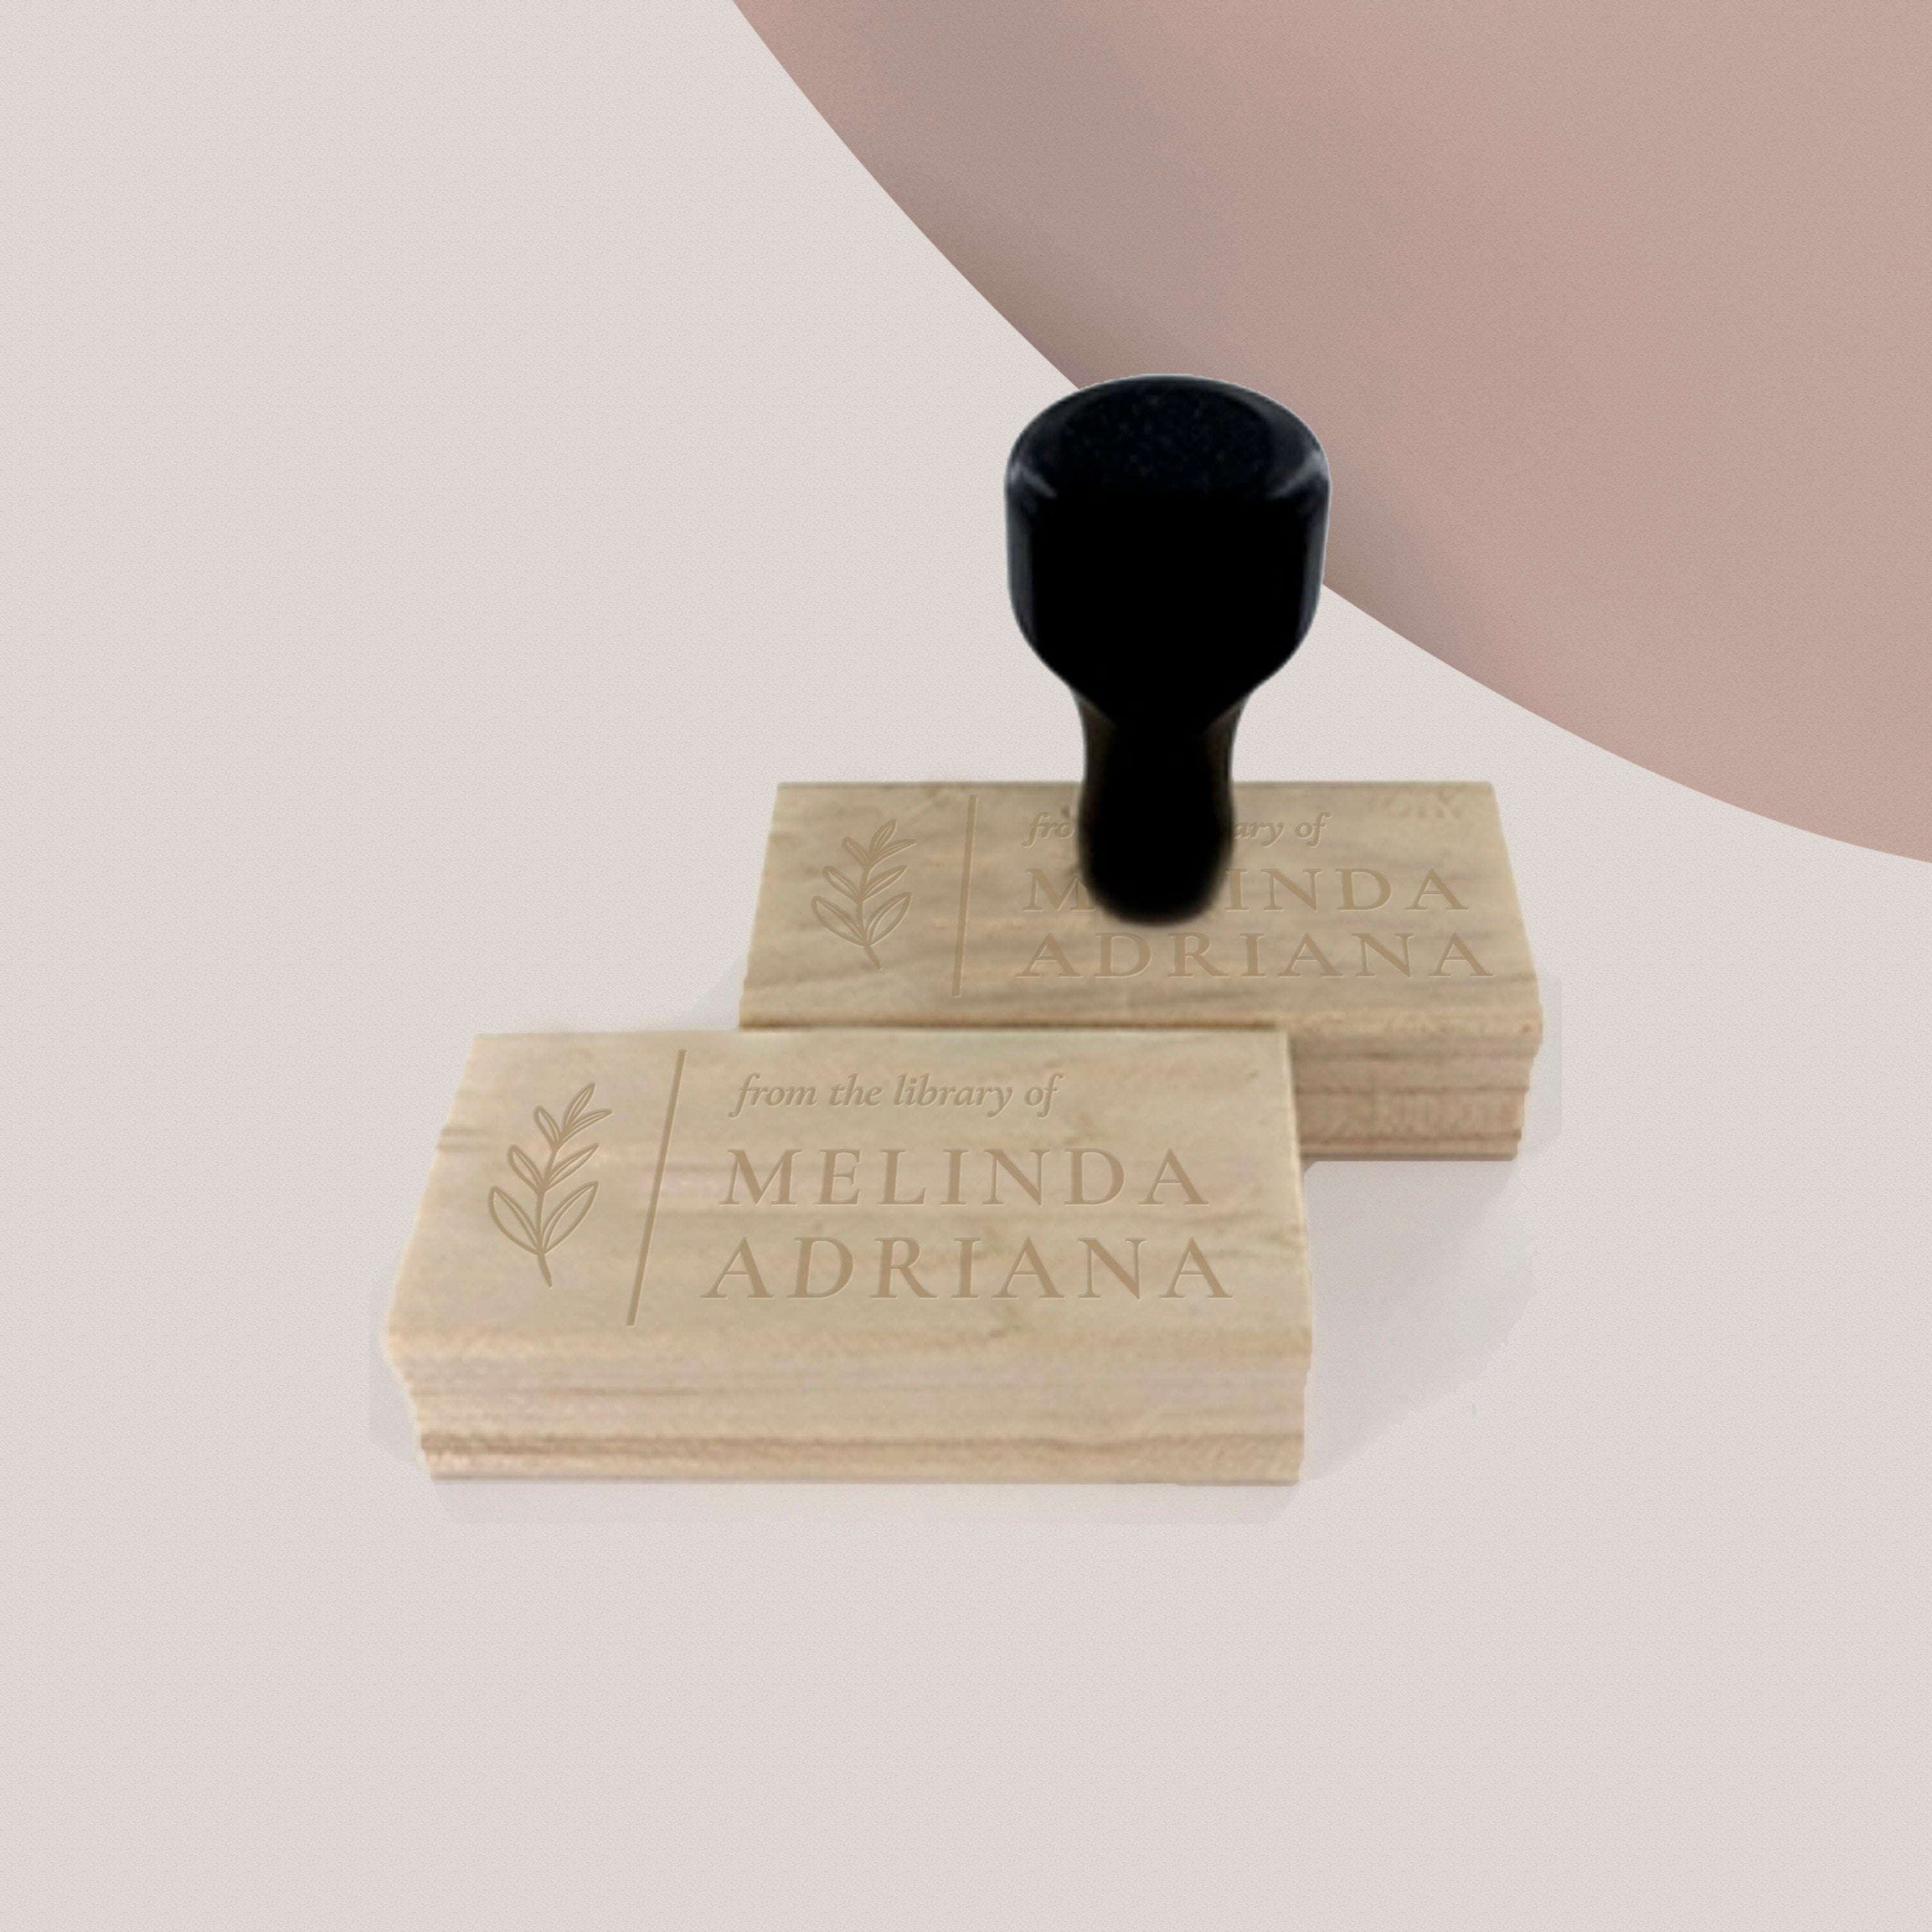 Printtoo Custom Wood Mount Library Rubber Stamp This Book Belongs to Personalized Stamper-2.6 x 1.1 Inches, Brown